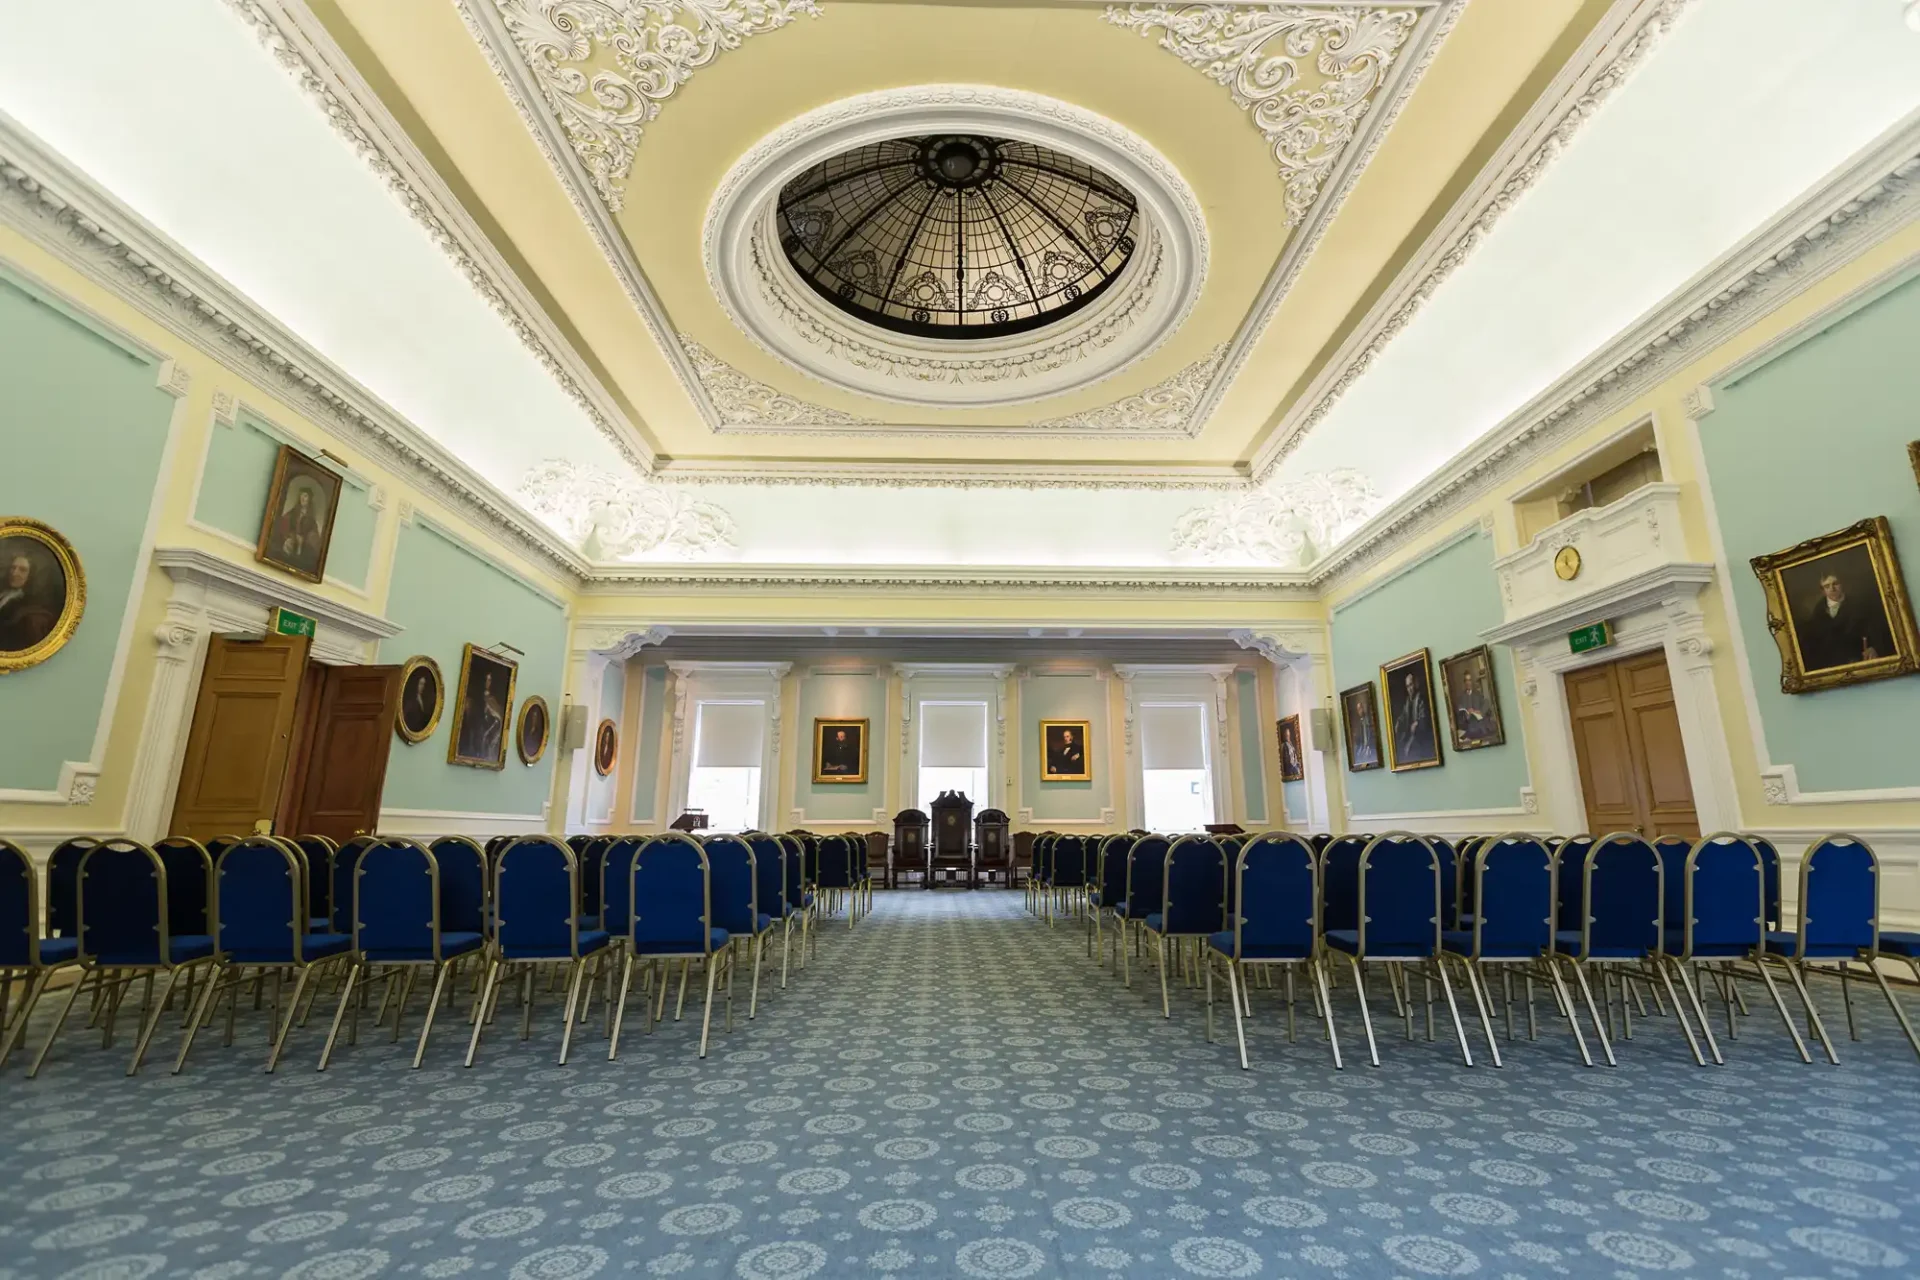 Elegant room featuring rows of blue chairs, light blue walls adorned with portraits, intricate white ceiling with a central skylight, and a patterned blue carpet.